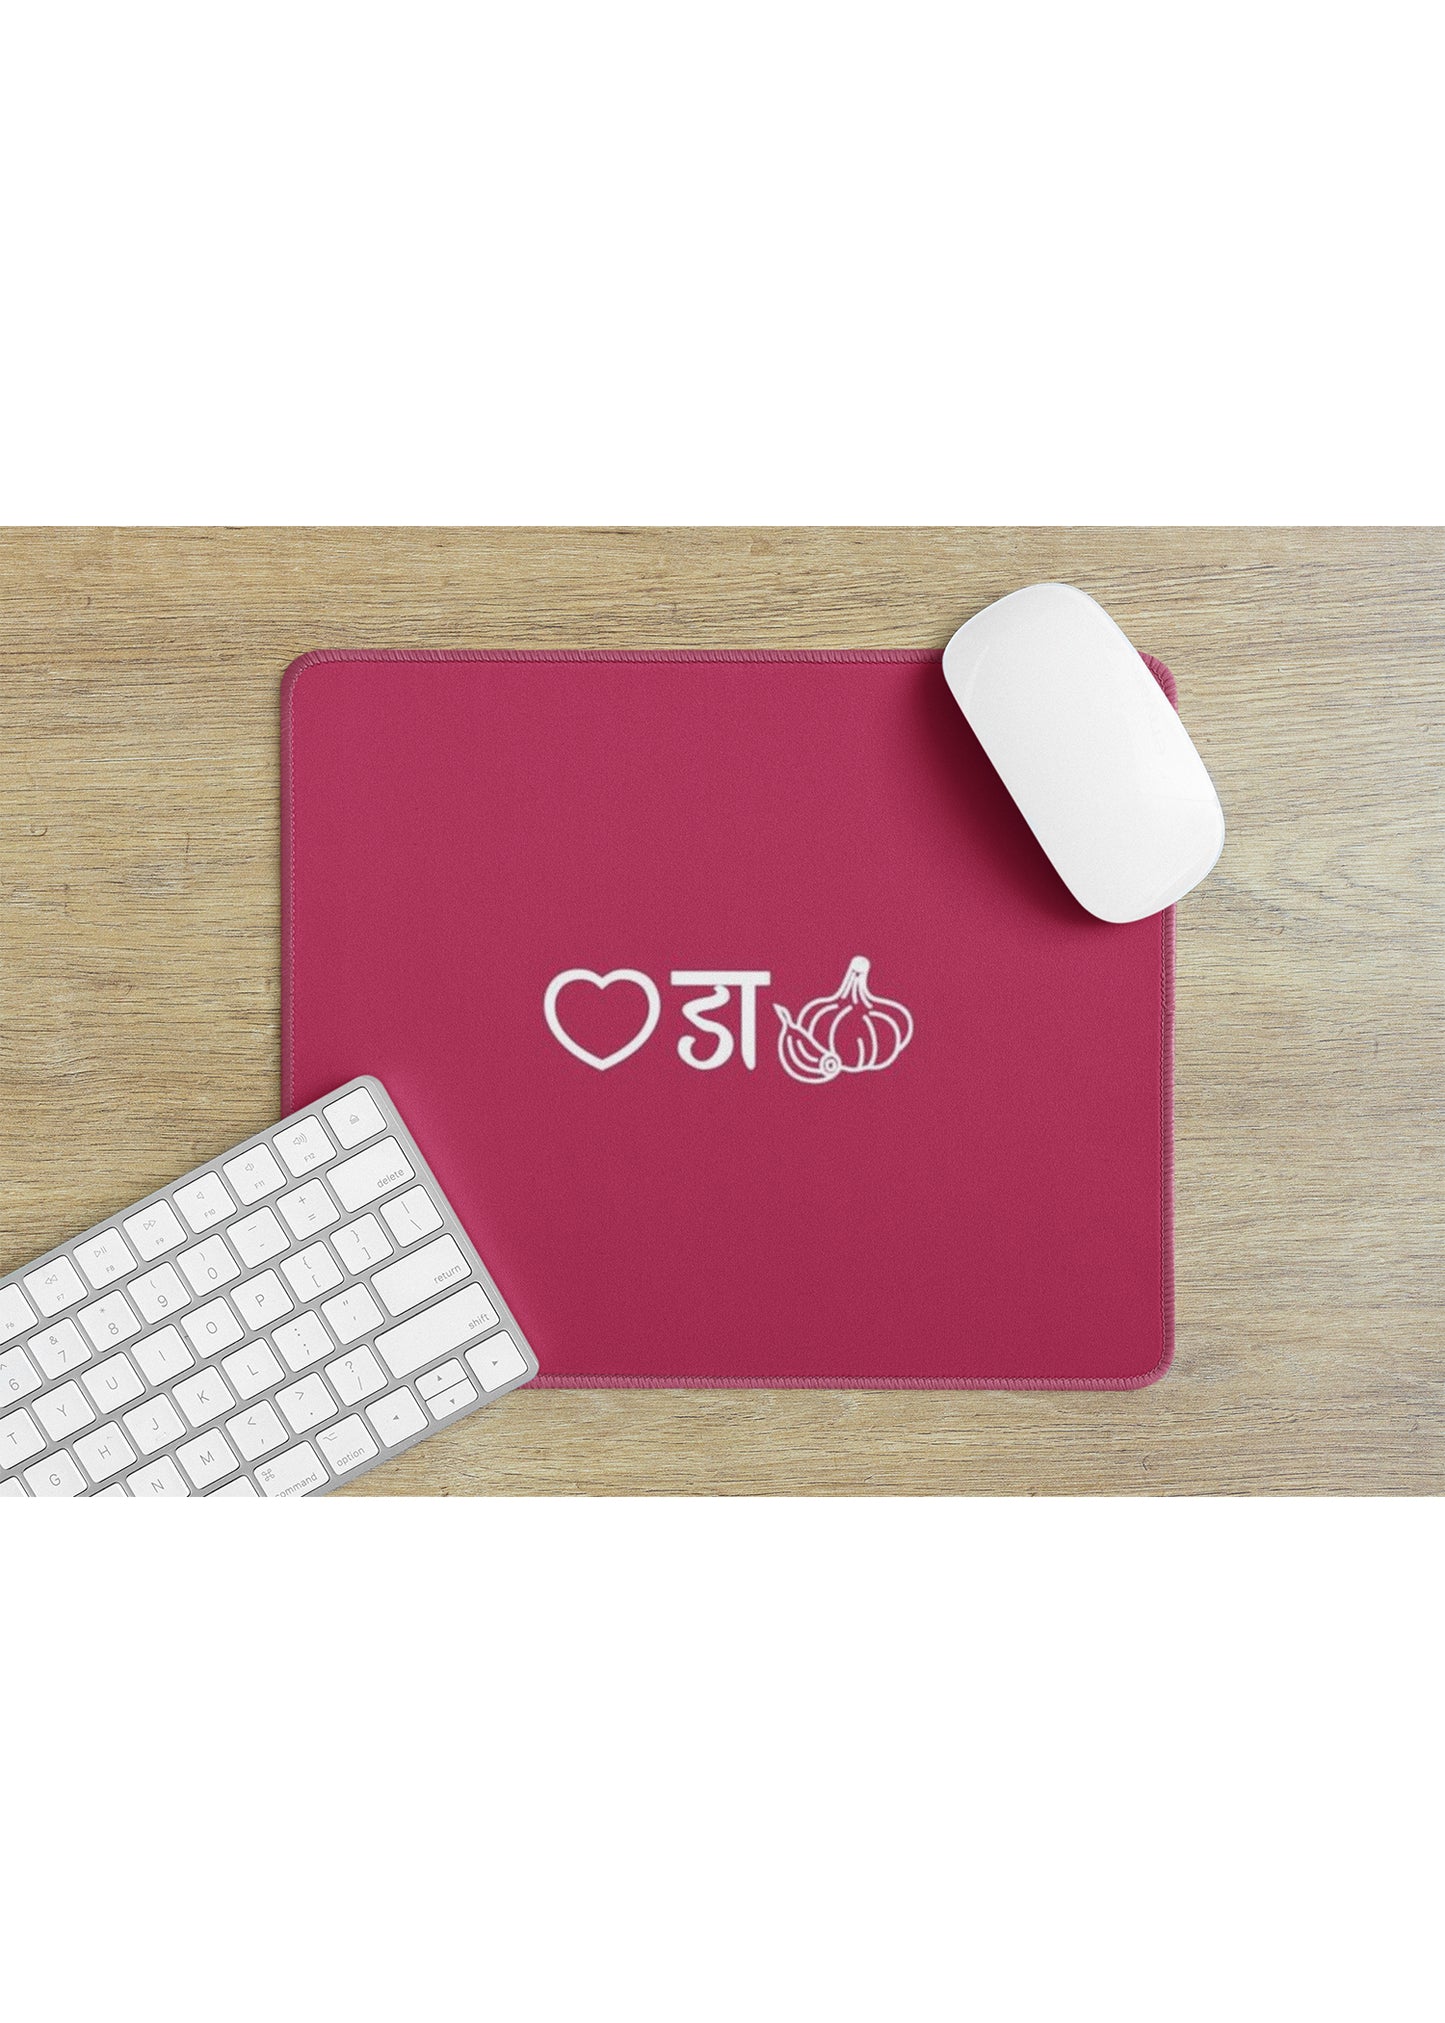 CODE WORD MOUSE PAD